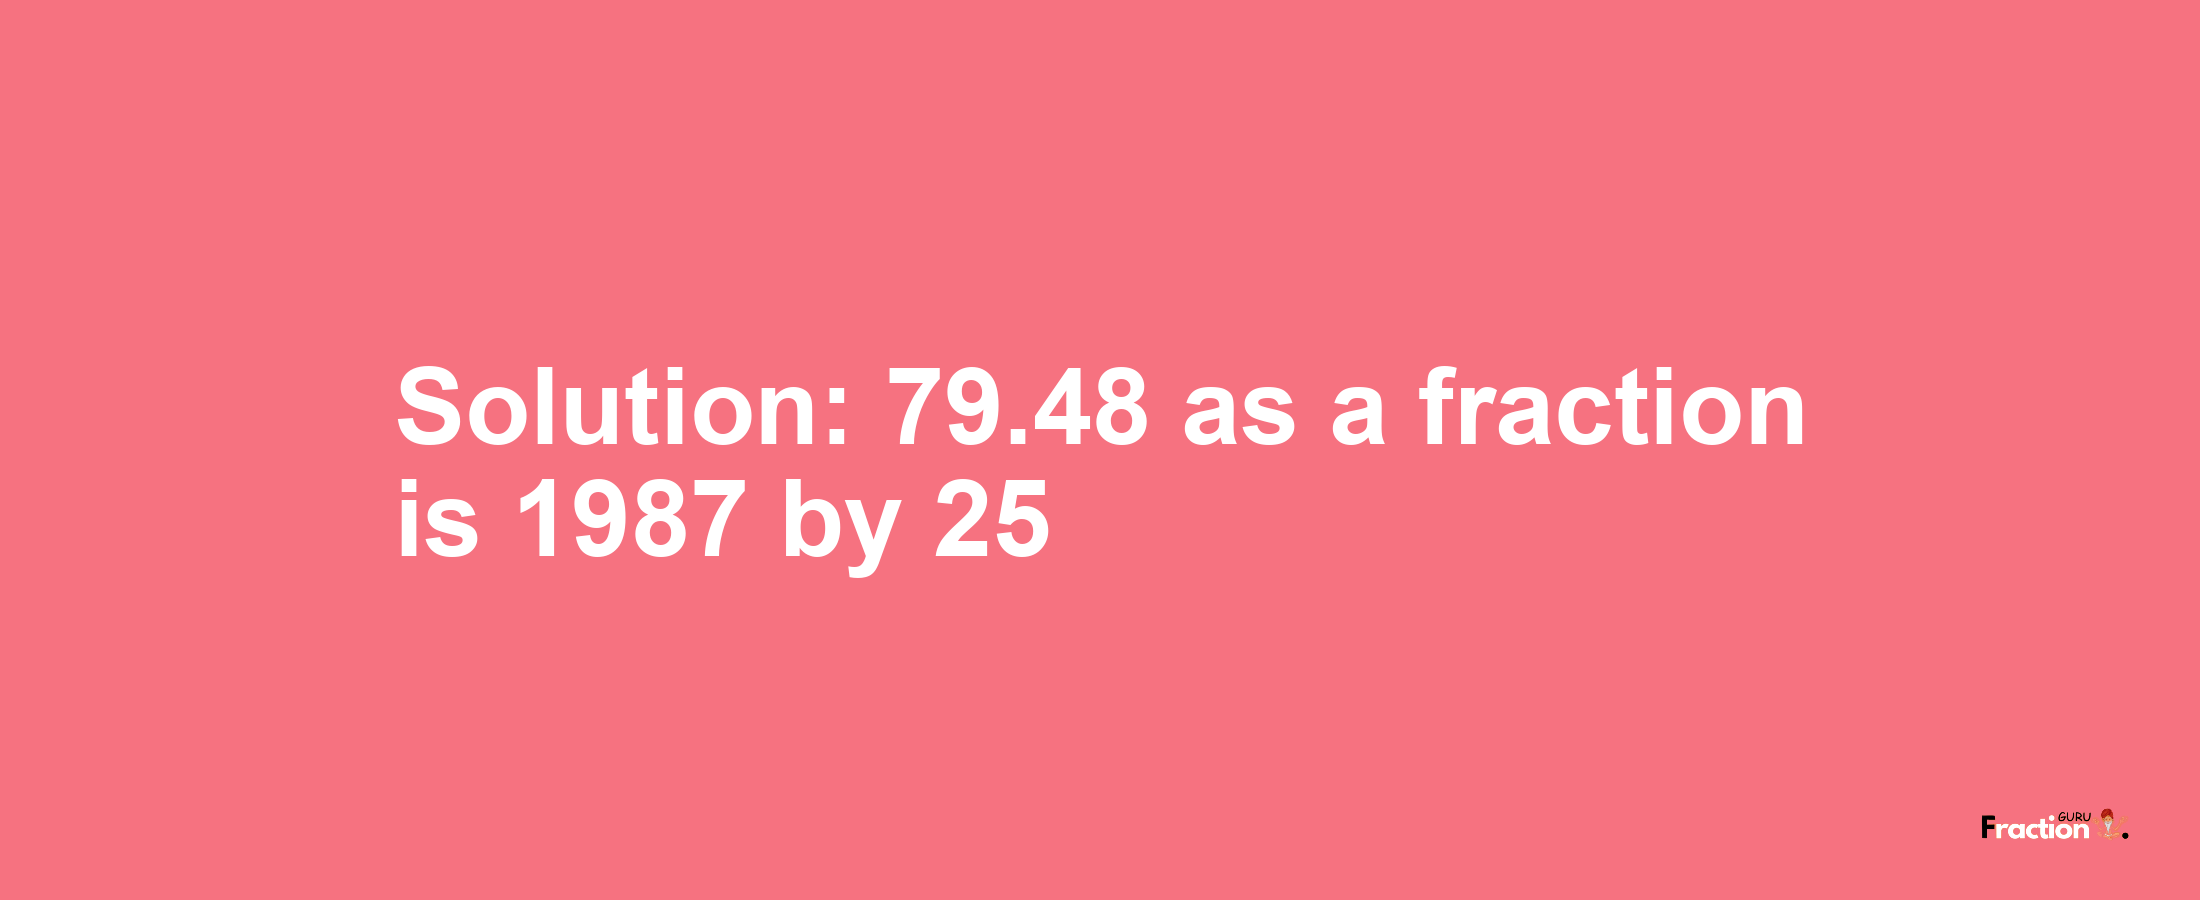 Solution:79.48 as a fraction is 1987/25